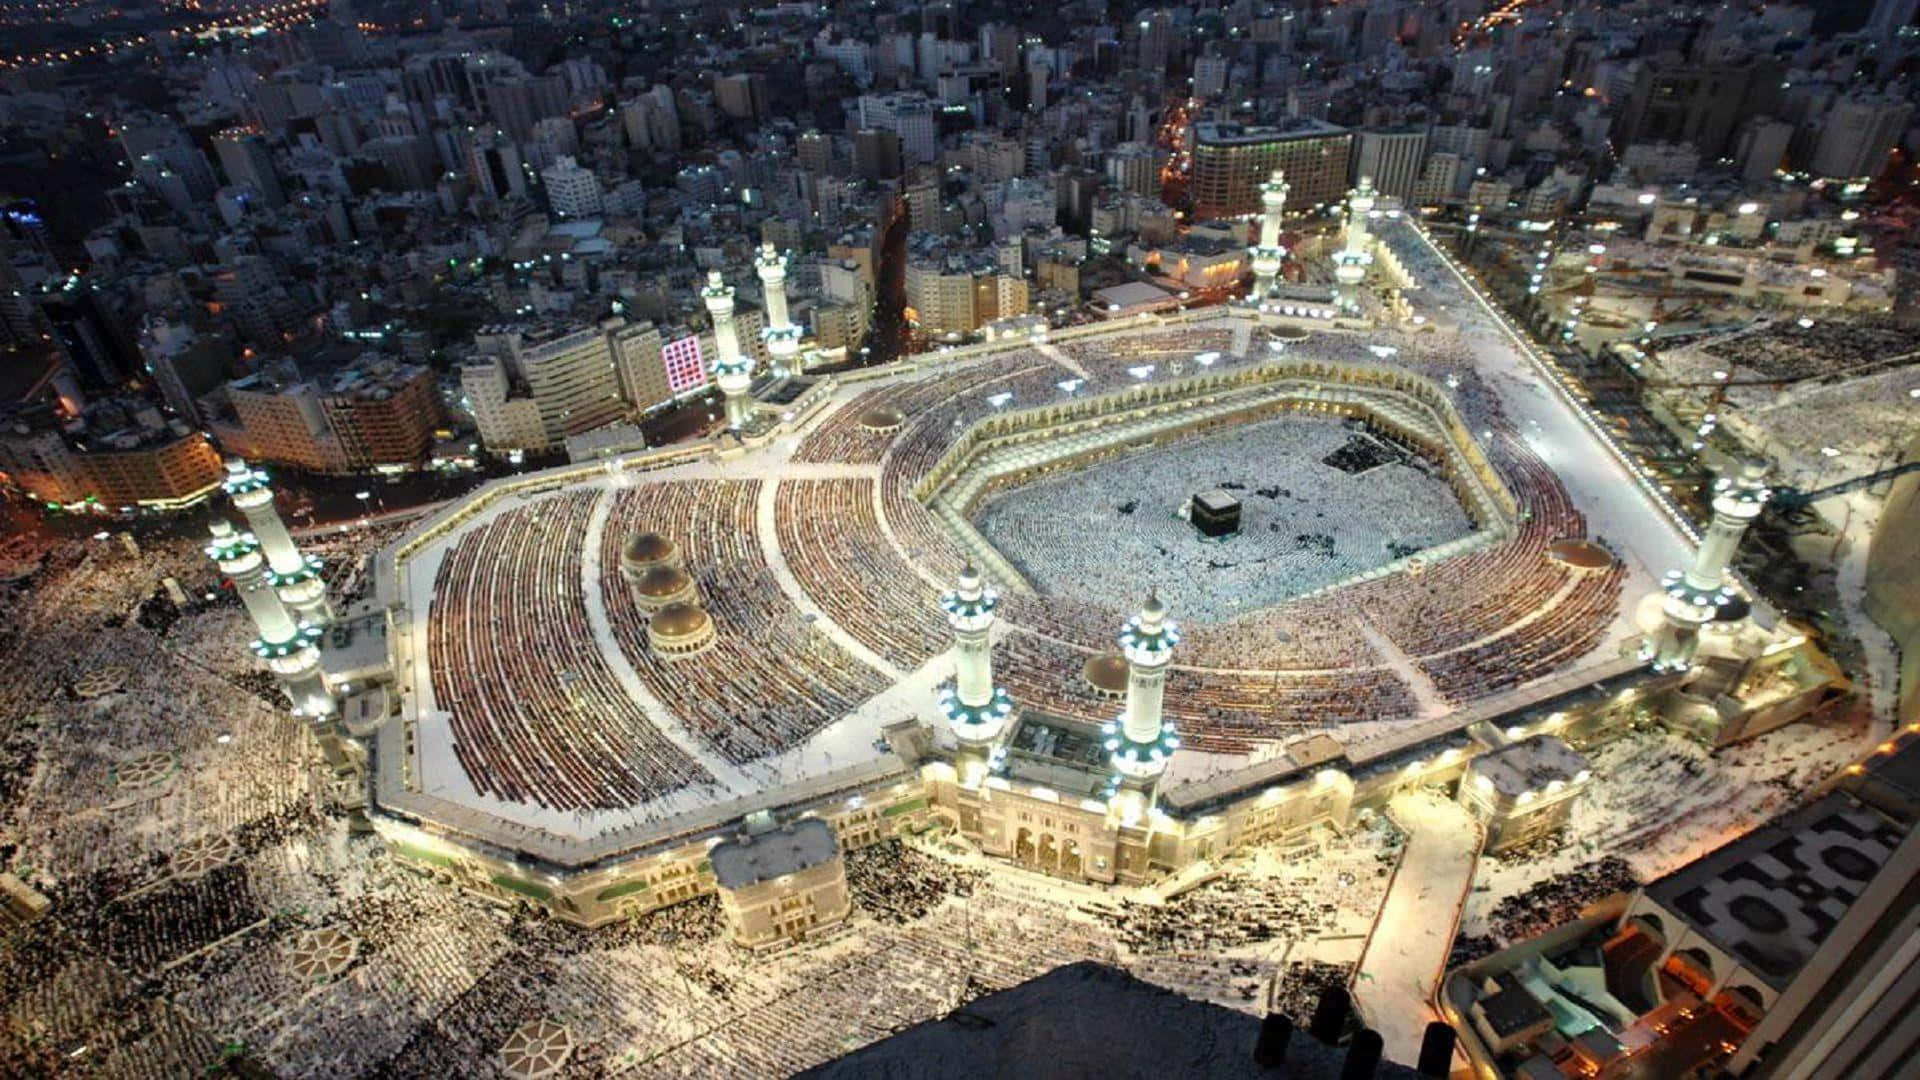 The Kaaba At Night With People Around It